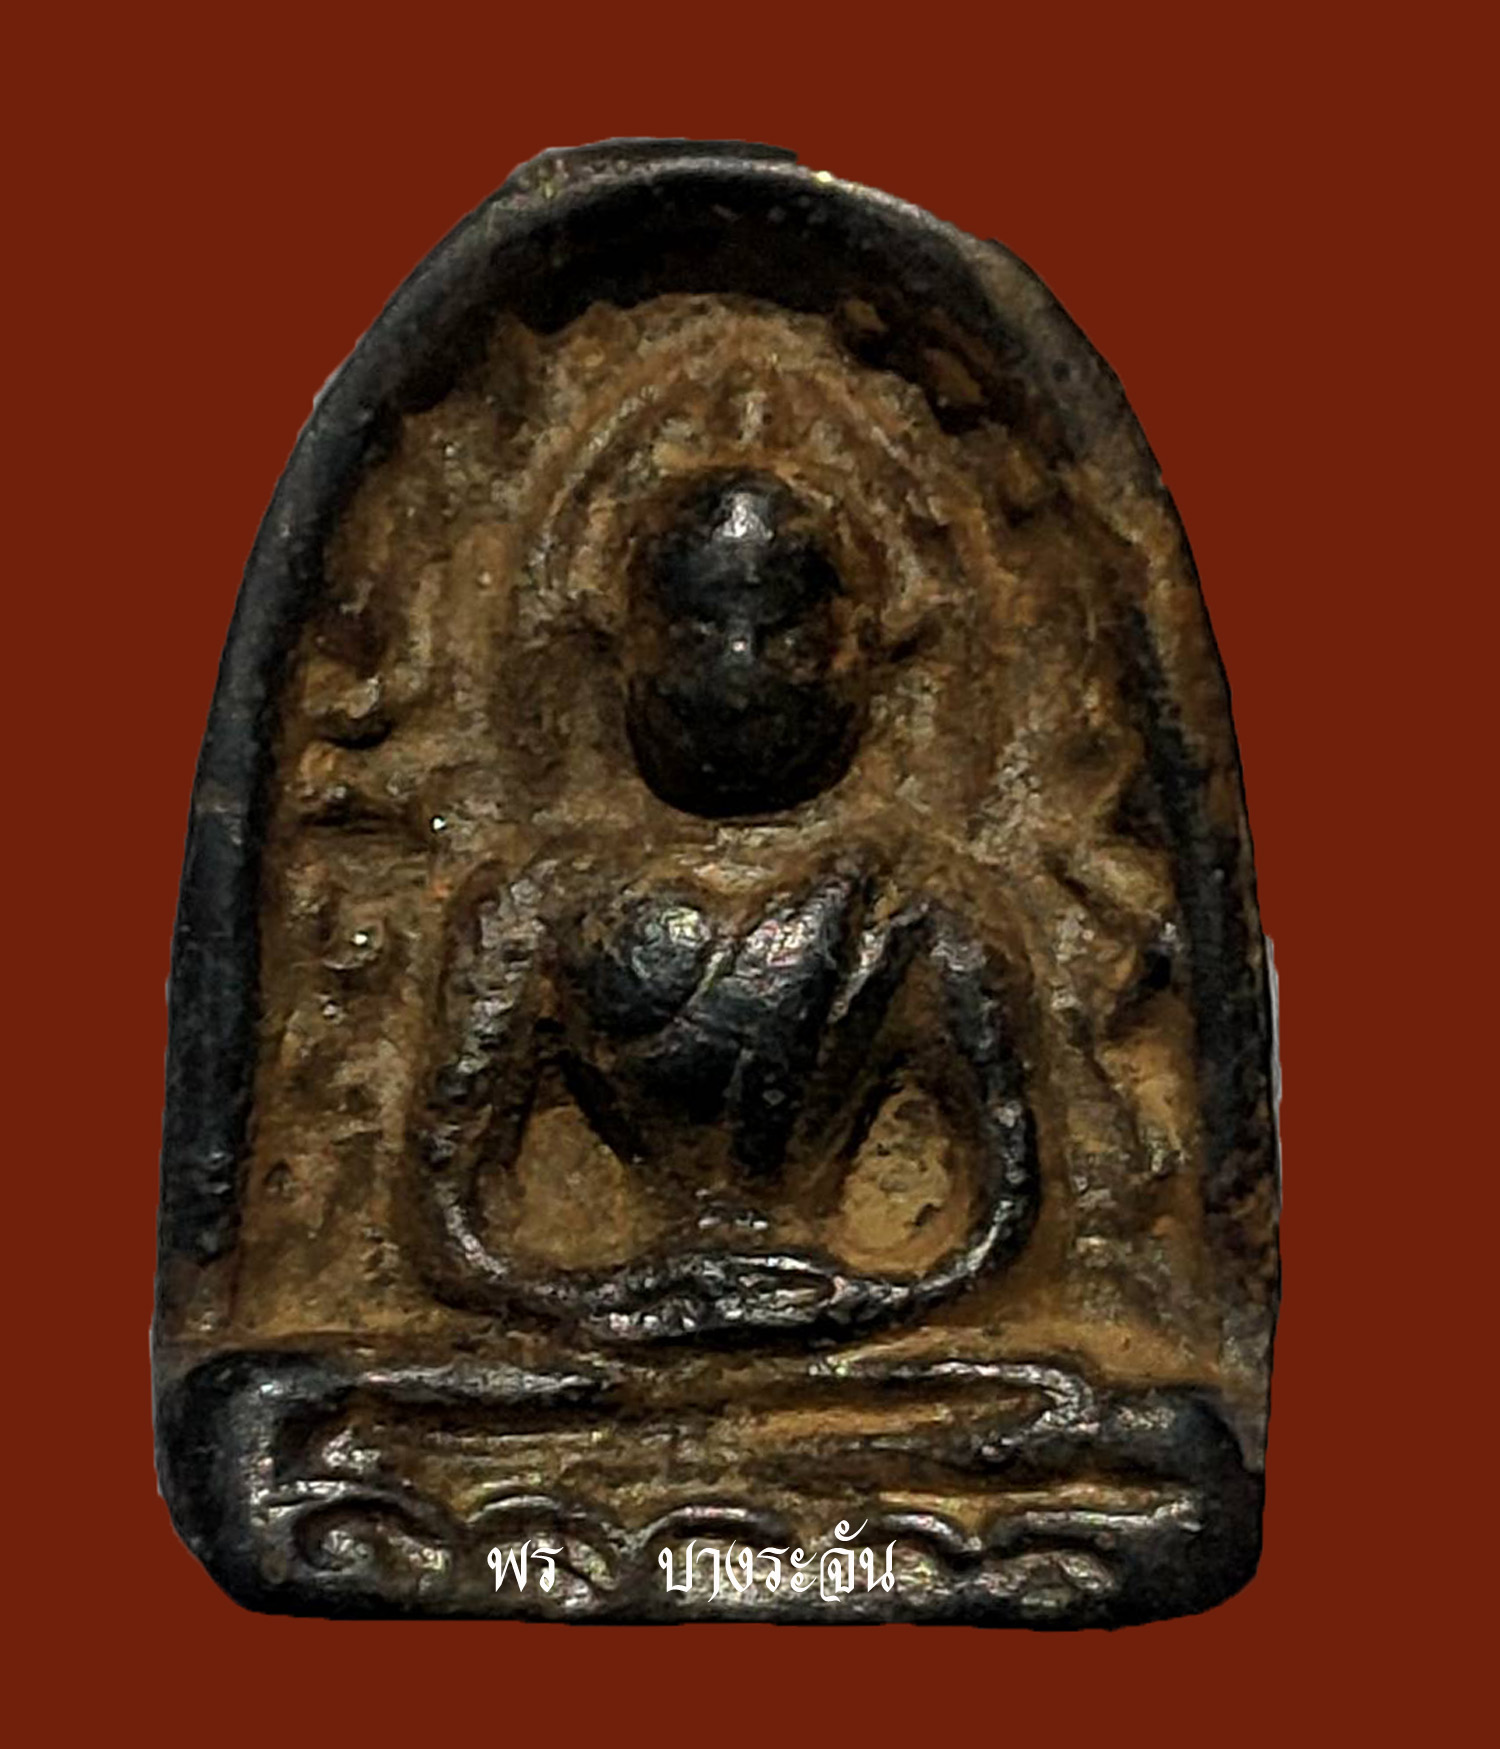 Phra Somkor were first discovered on B.E. 2392 in Wat Phra Boromathat. Gumpangpeth province.